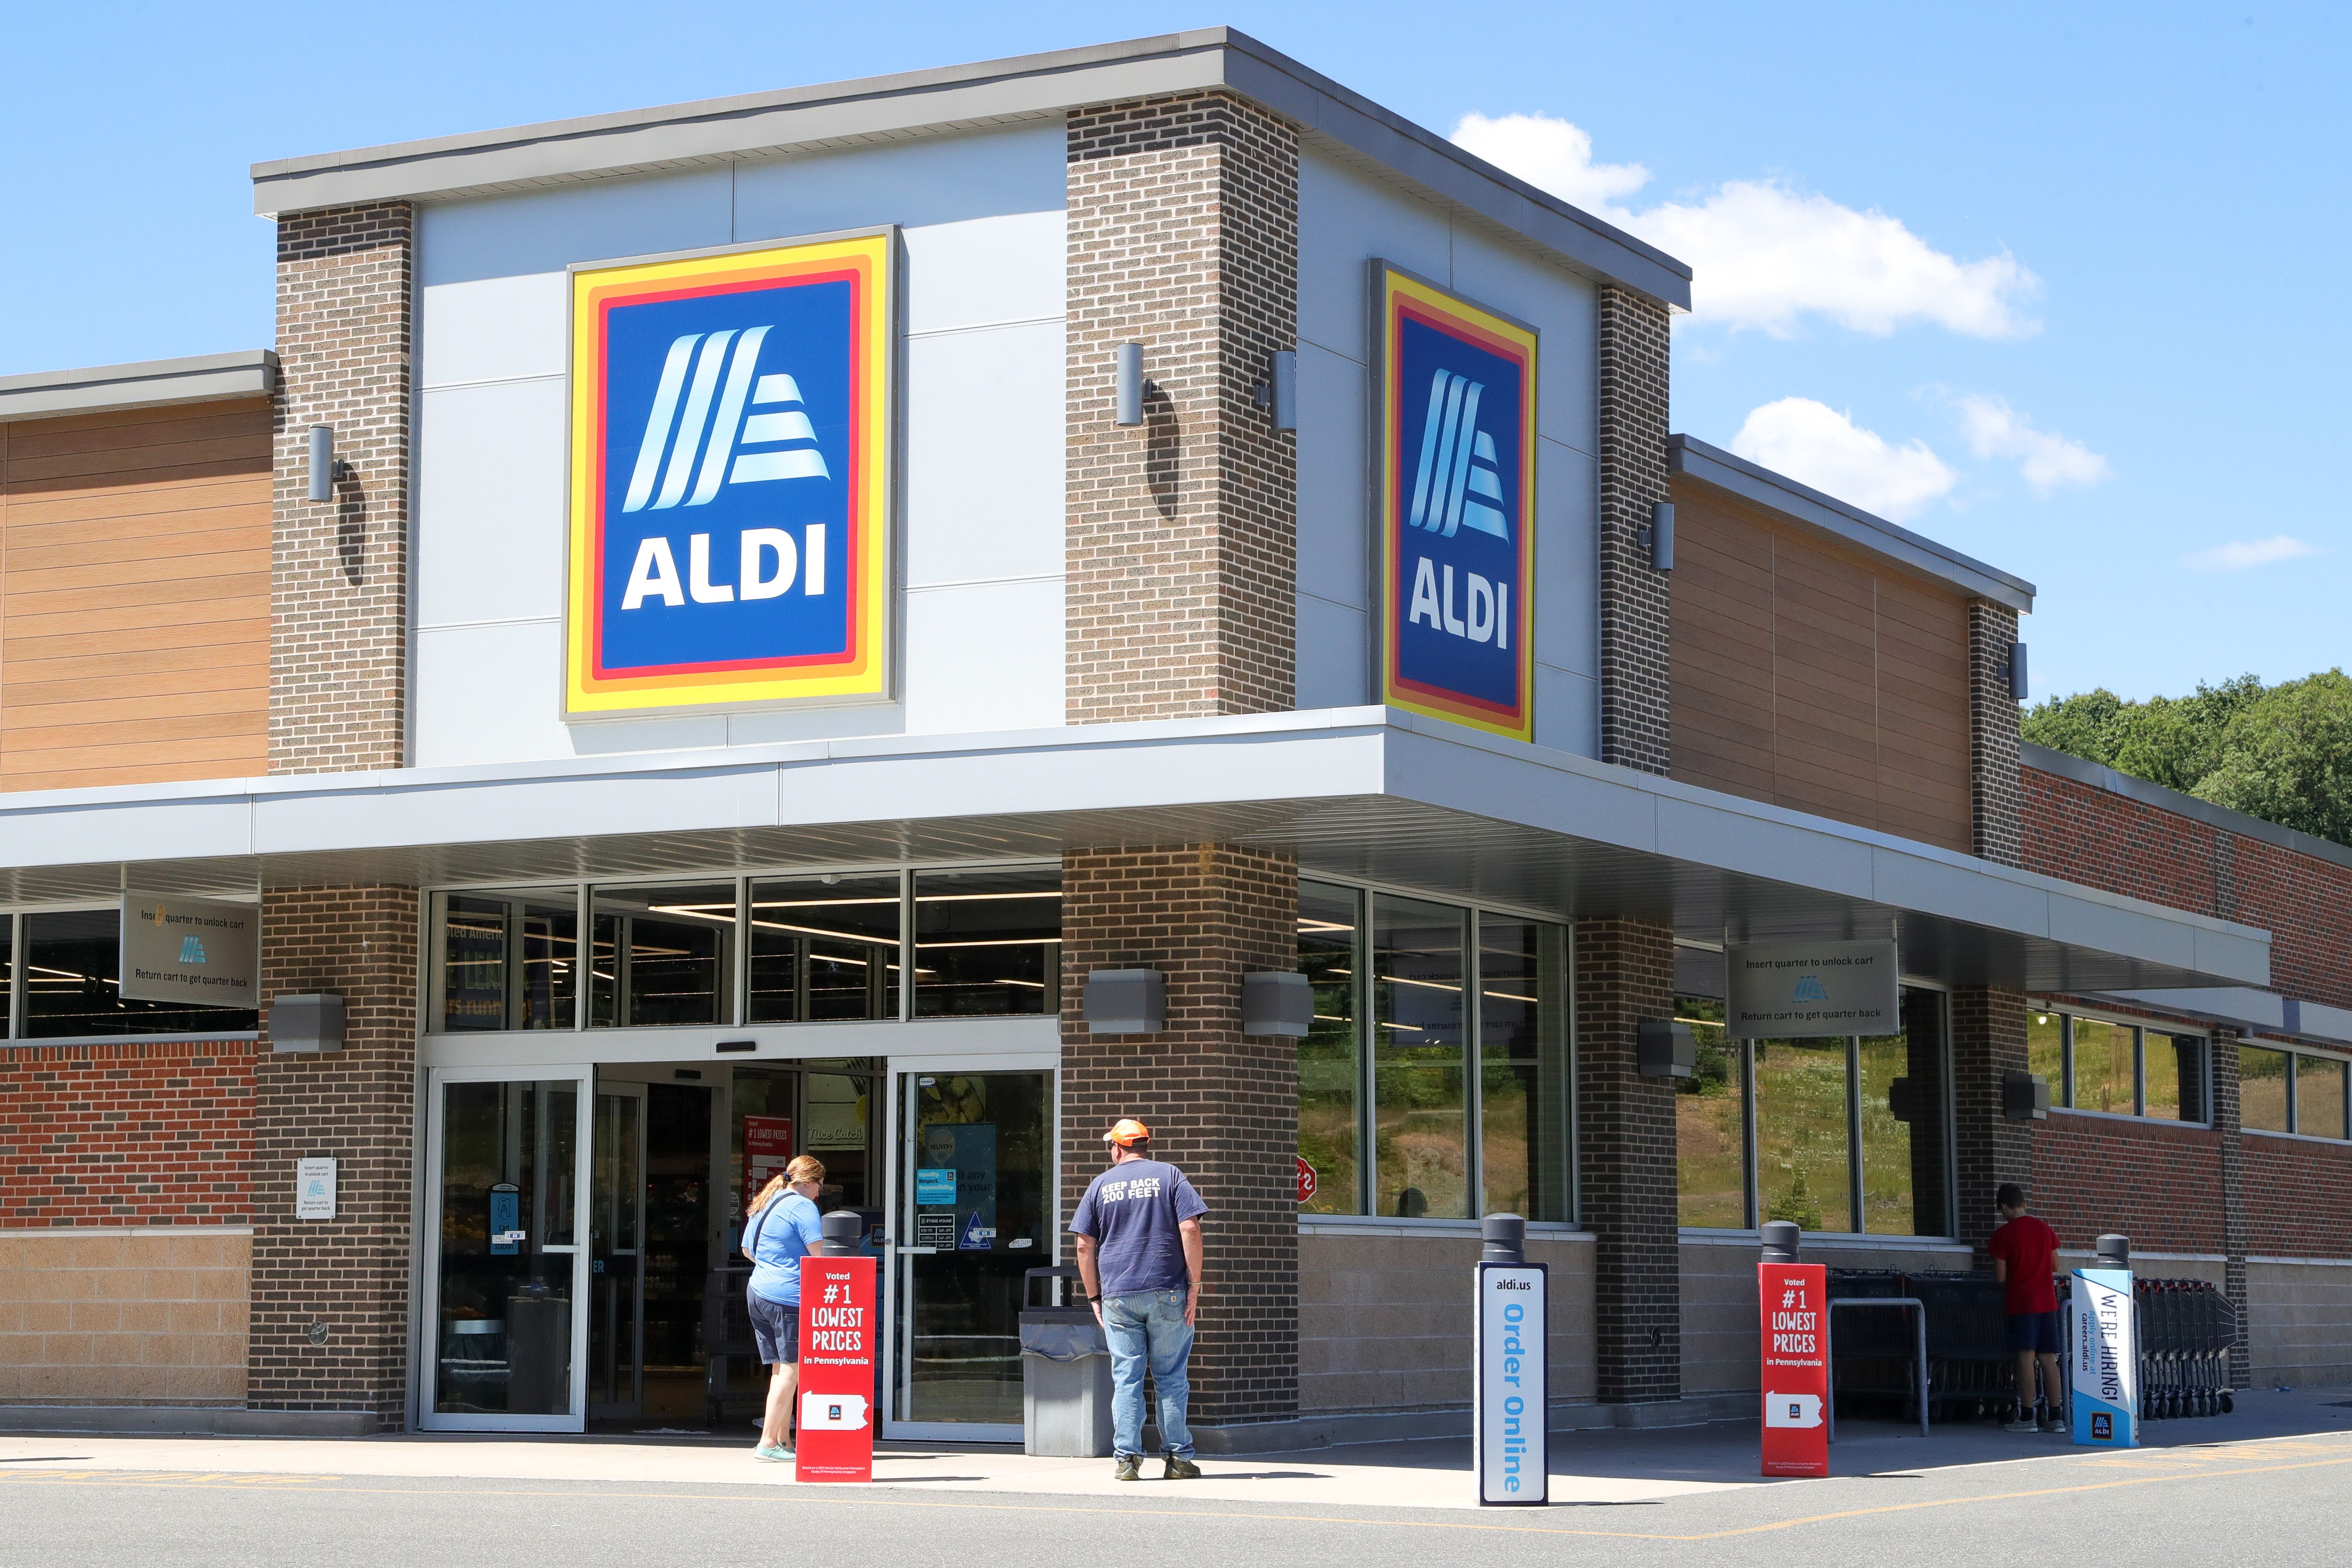 ALDI Have Released A Cheap Fitness Range